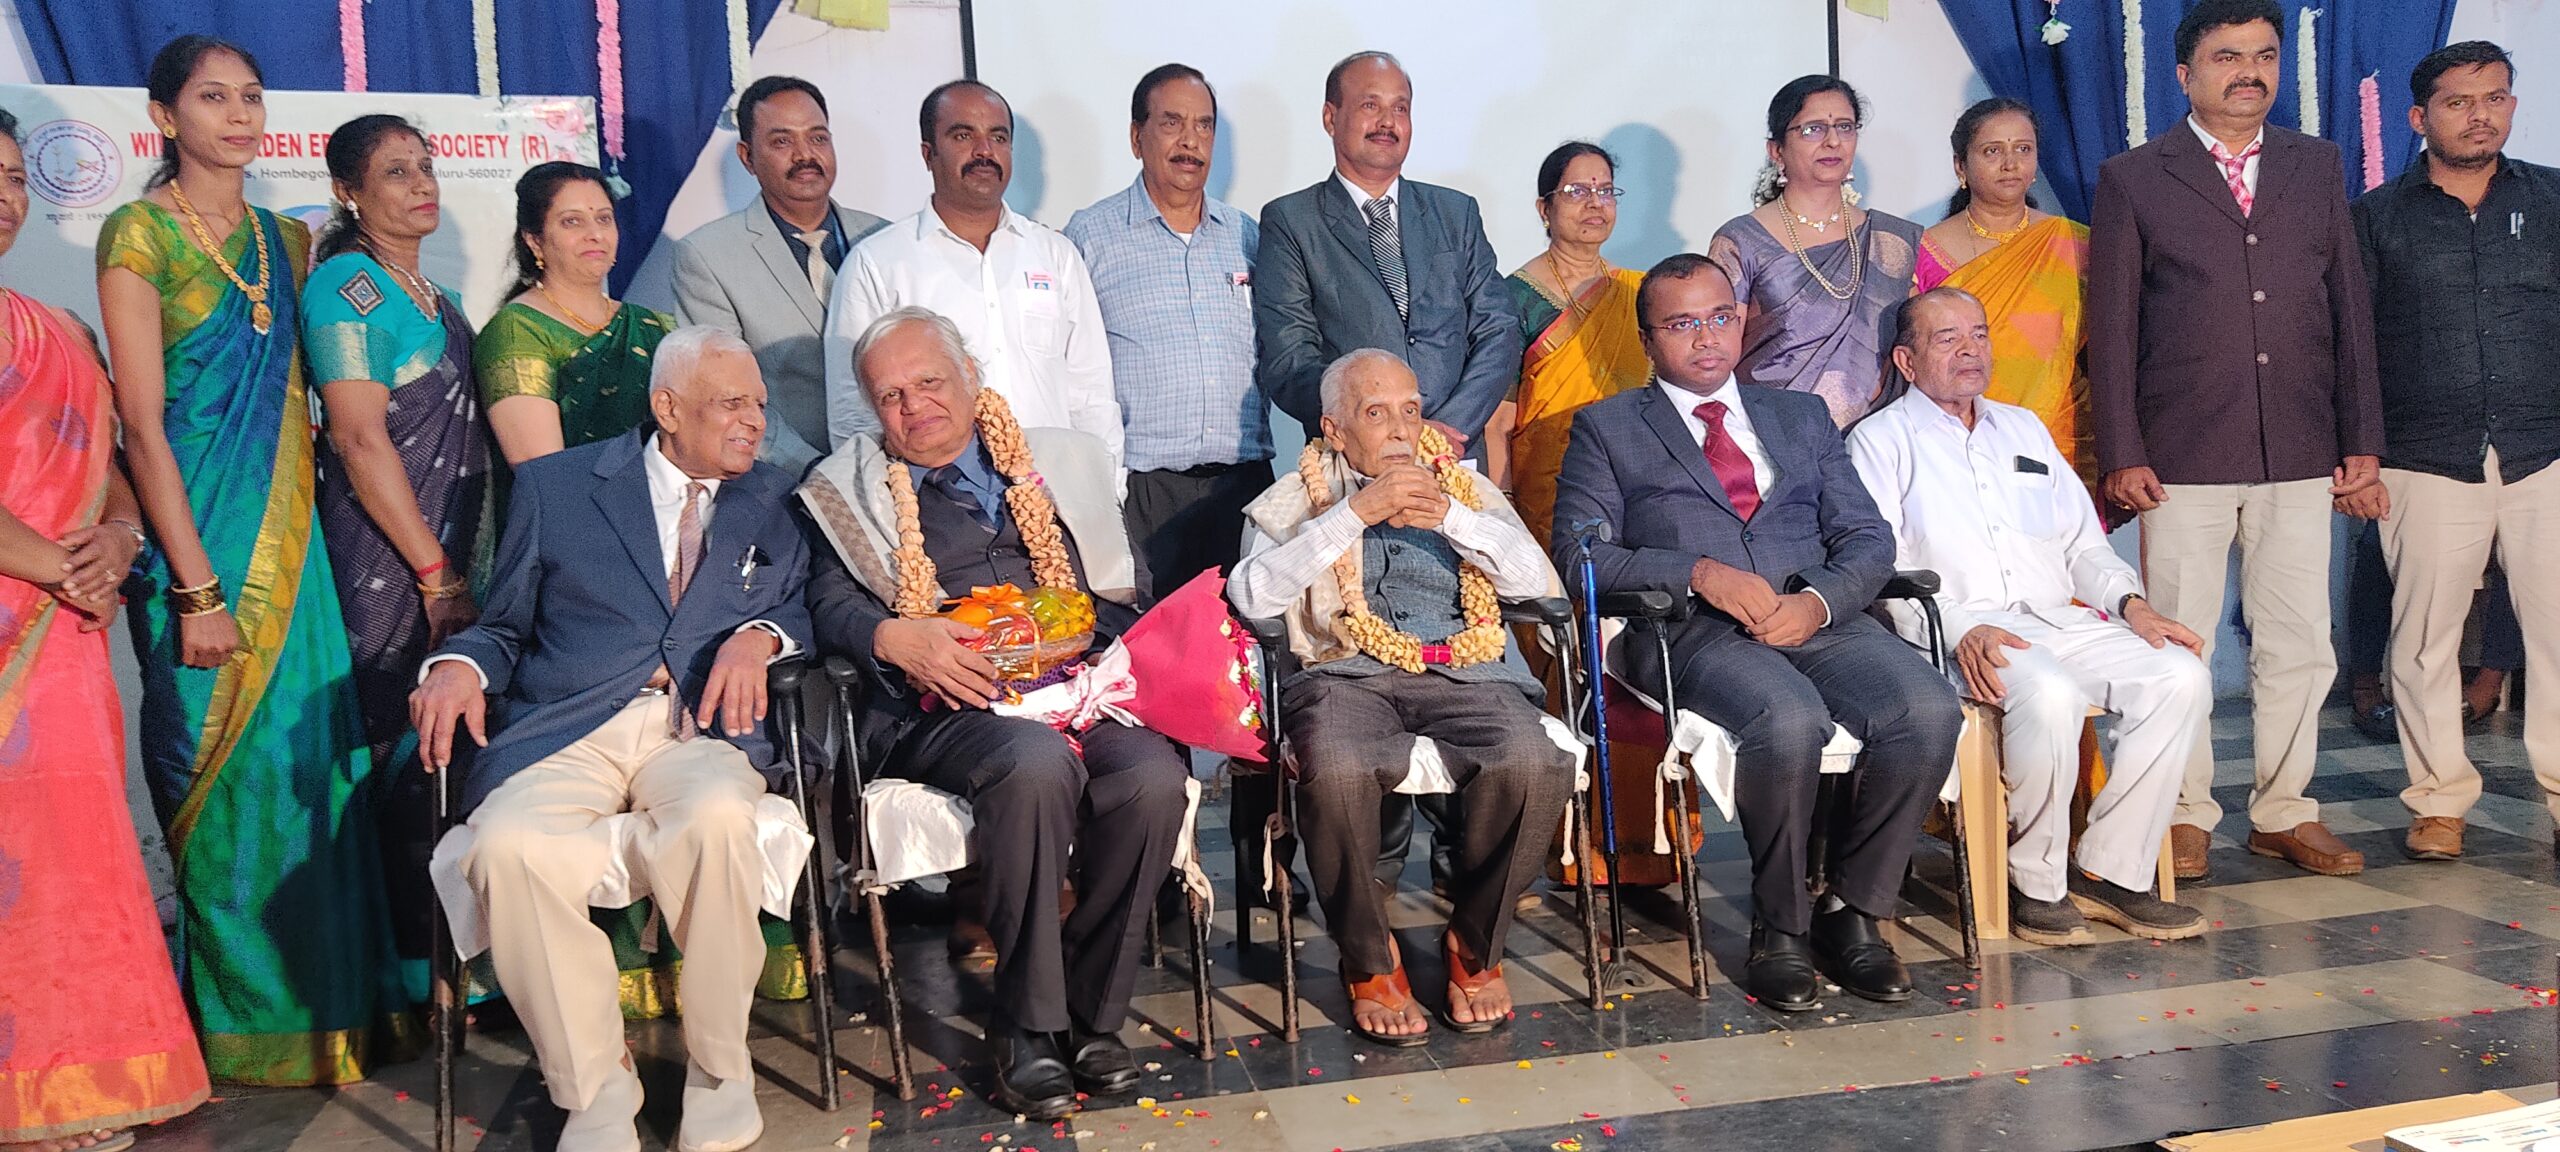 HOMBE GOWDA COLLEGE CELEBRATES FOUNDERS DAY